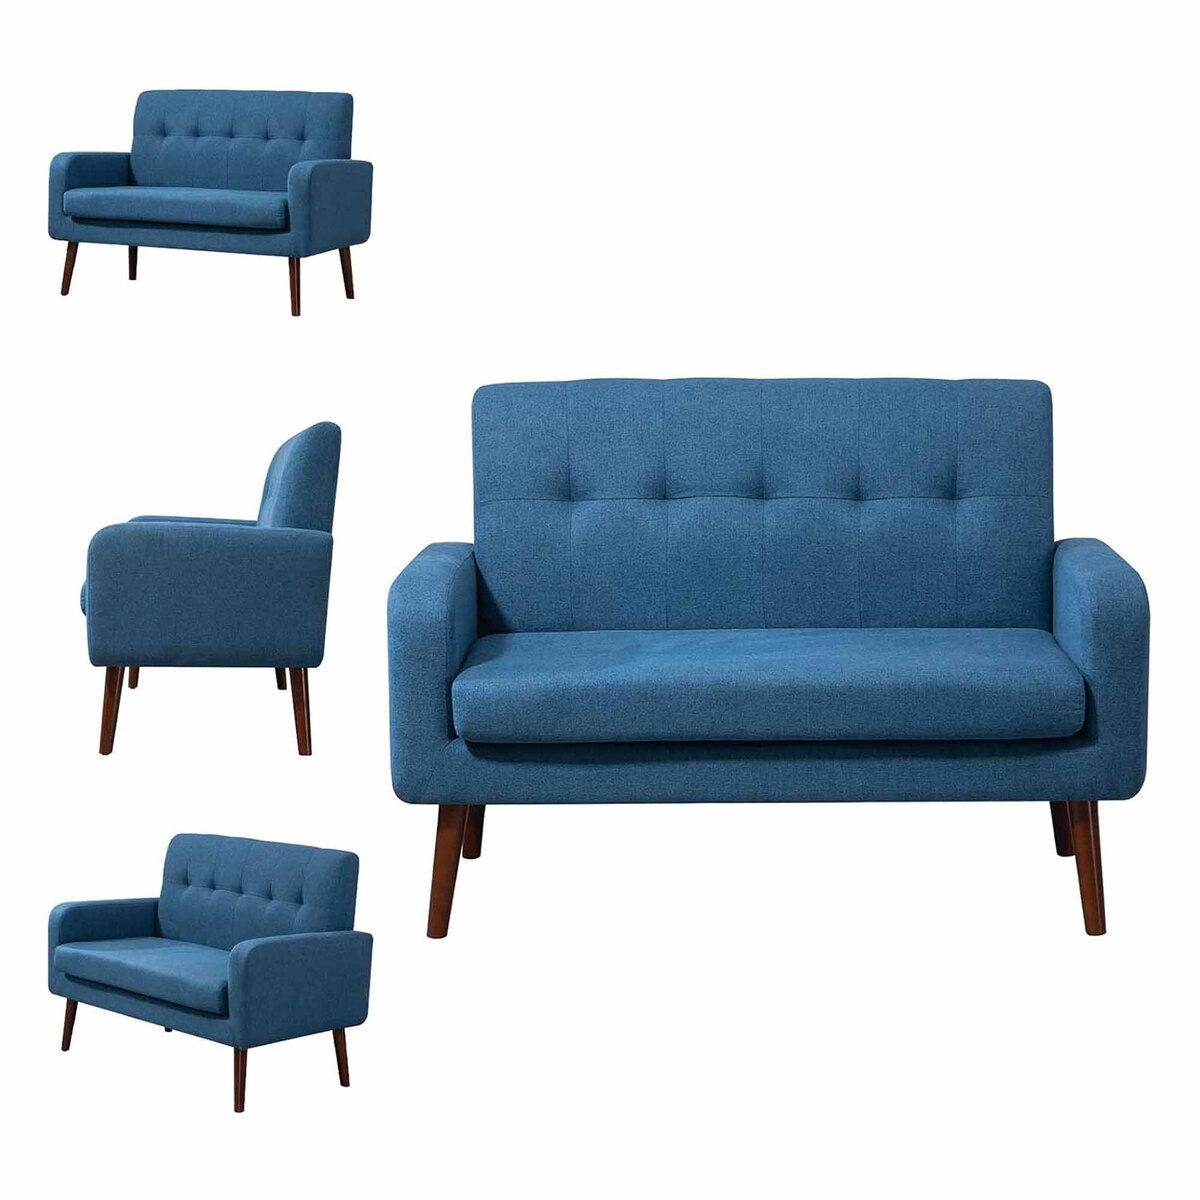 Zestoria, Blue  2-Seater Tufted Linen Fabric Sofa, Track Arm Style, Solid Stiletto legs, Comfy for Living Room, Bedroom, Home Office